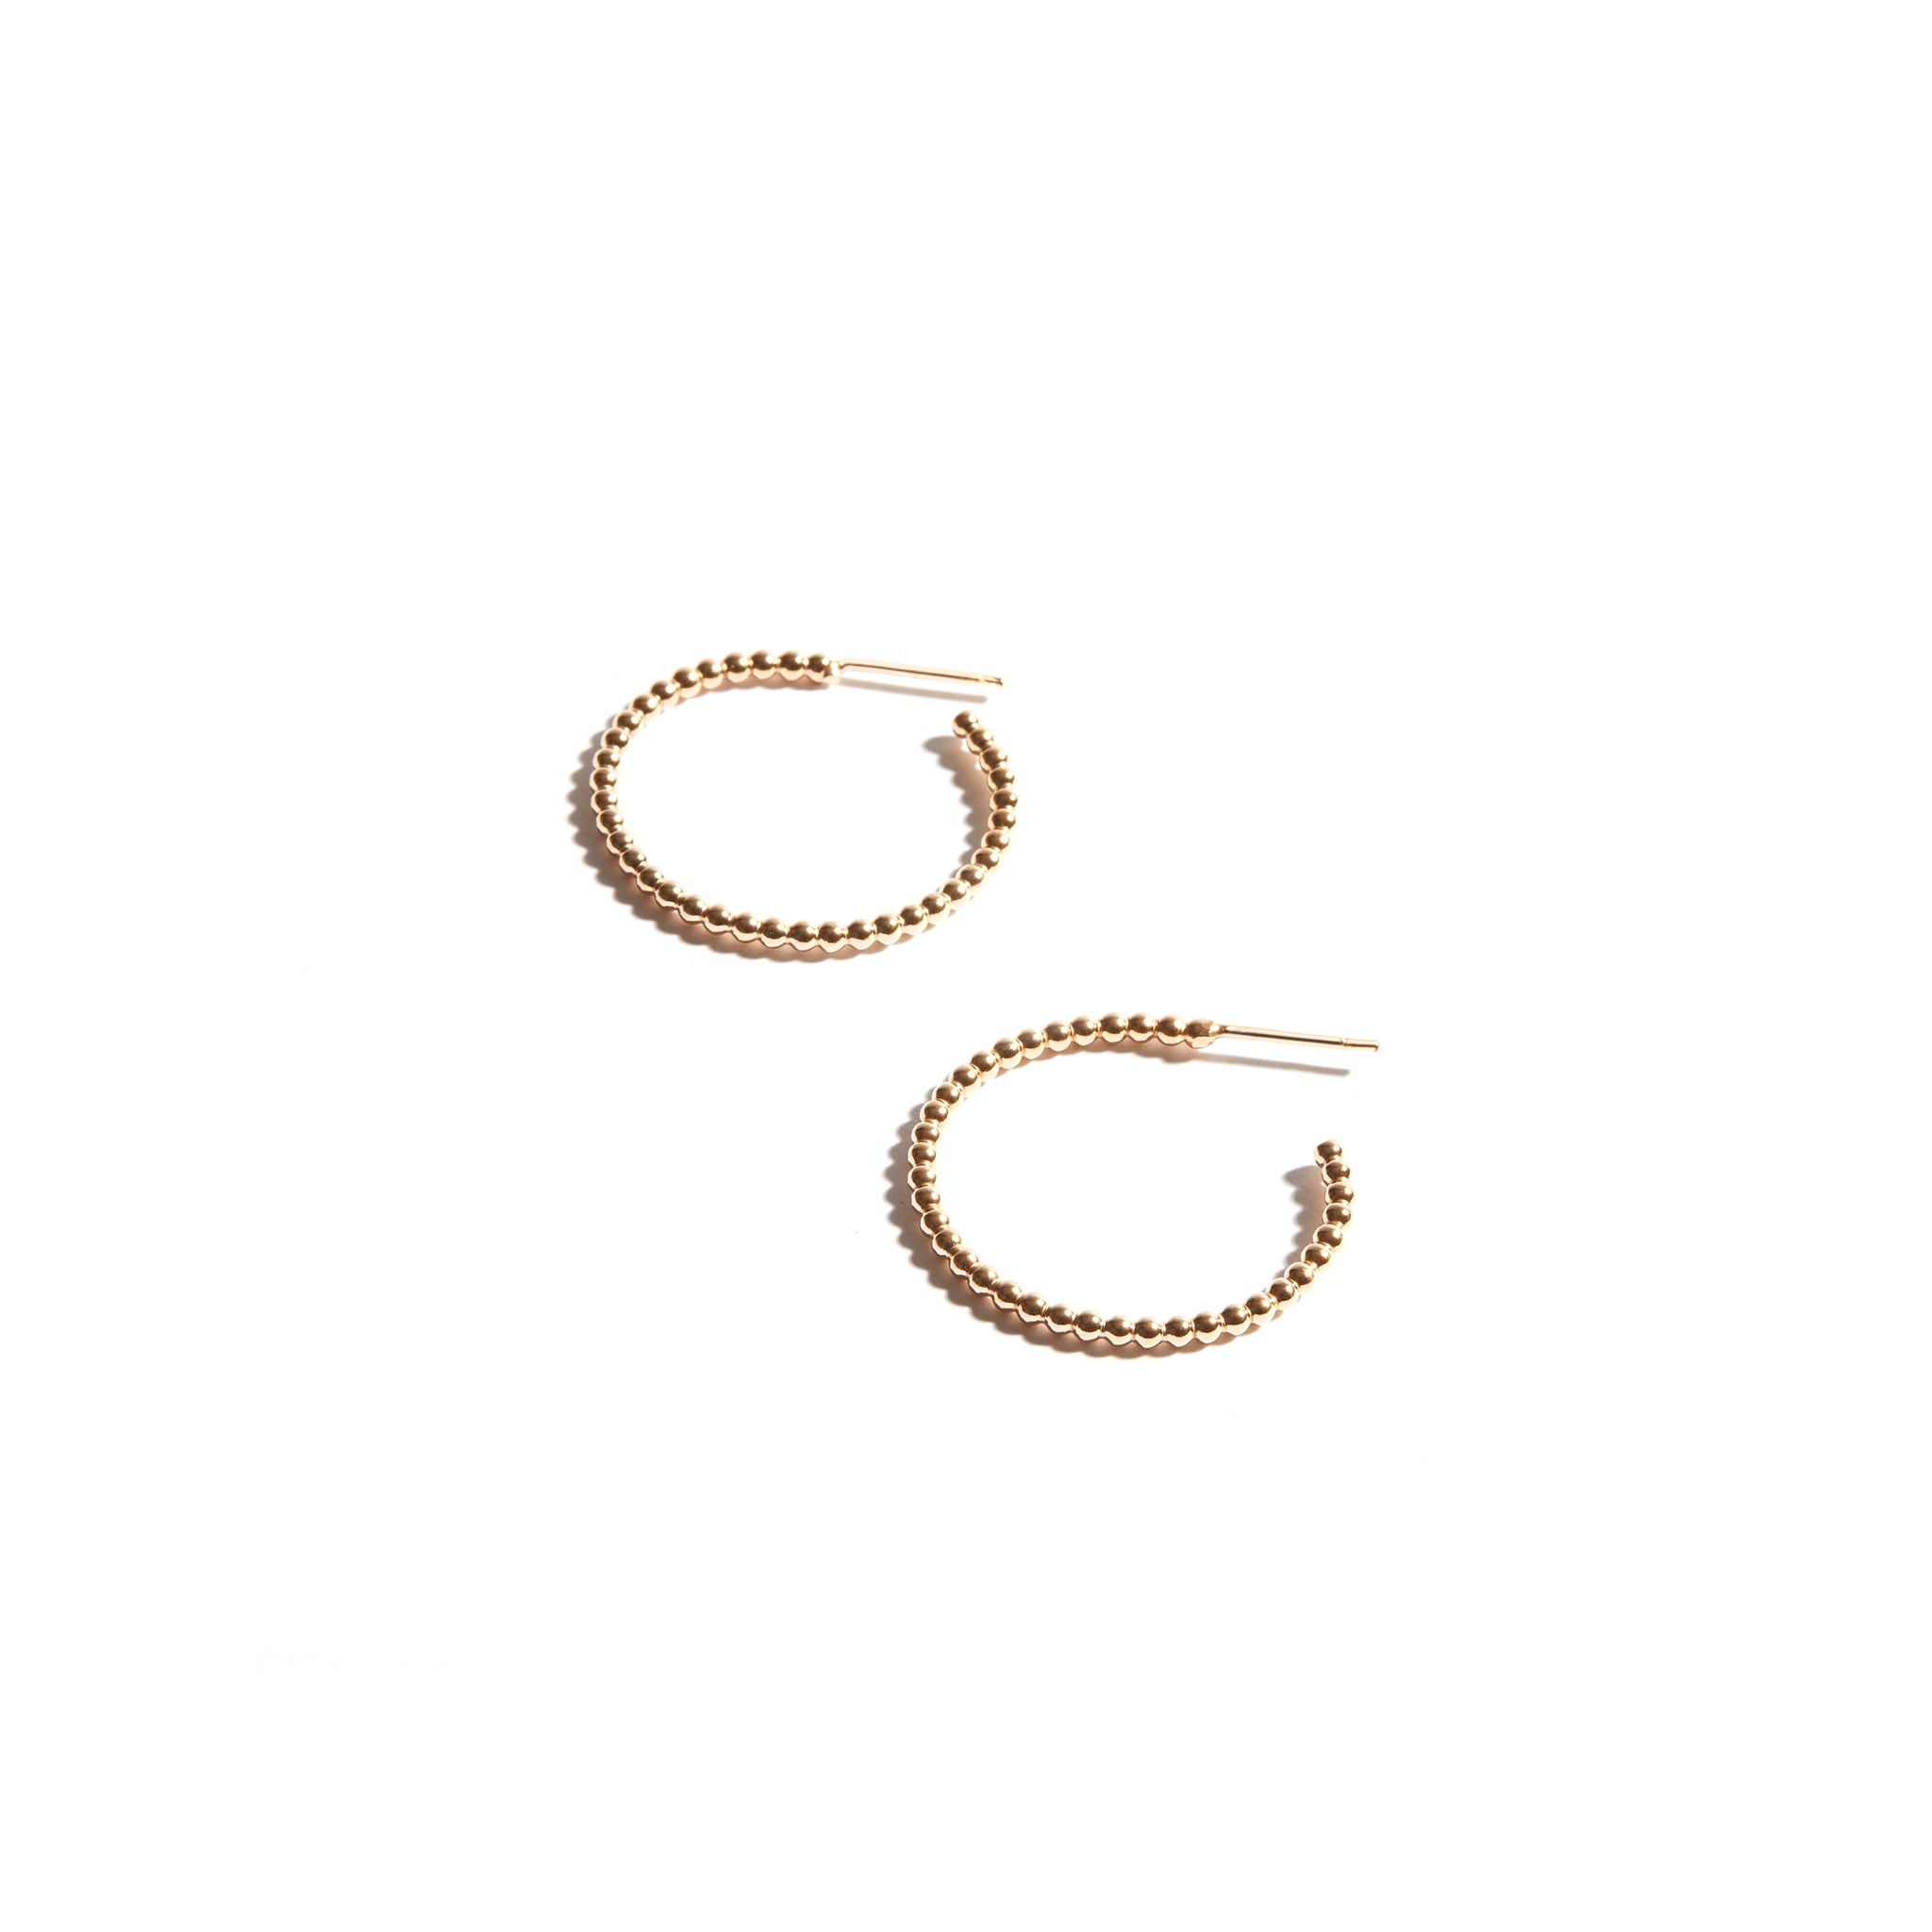 Stylish Large Bubble Hoop Earrings made from 14ct gold fill, featuring a textured design with small bubbles, perfect for adding a touch of charm to any outfit.